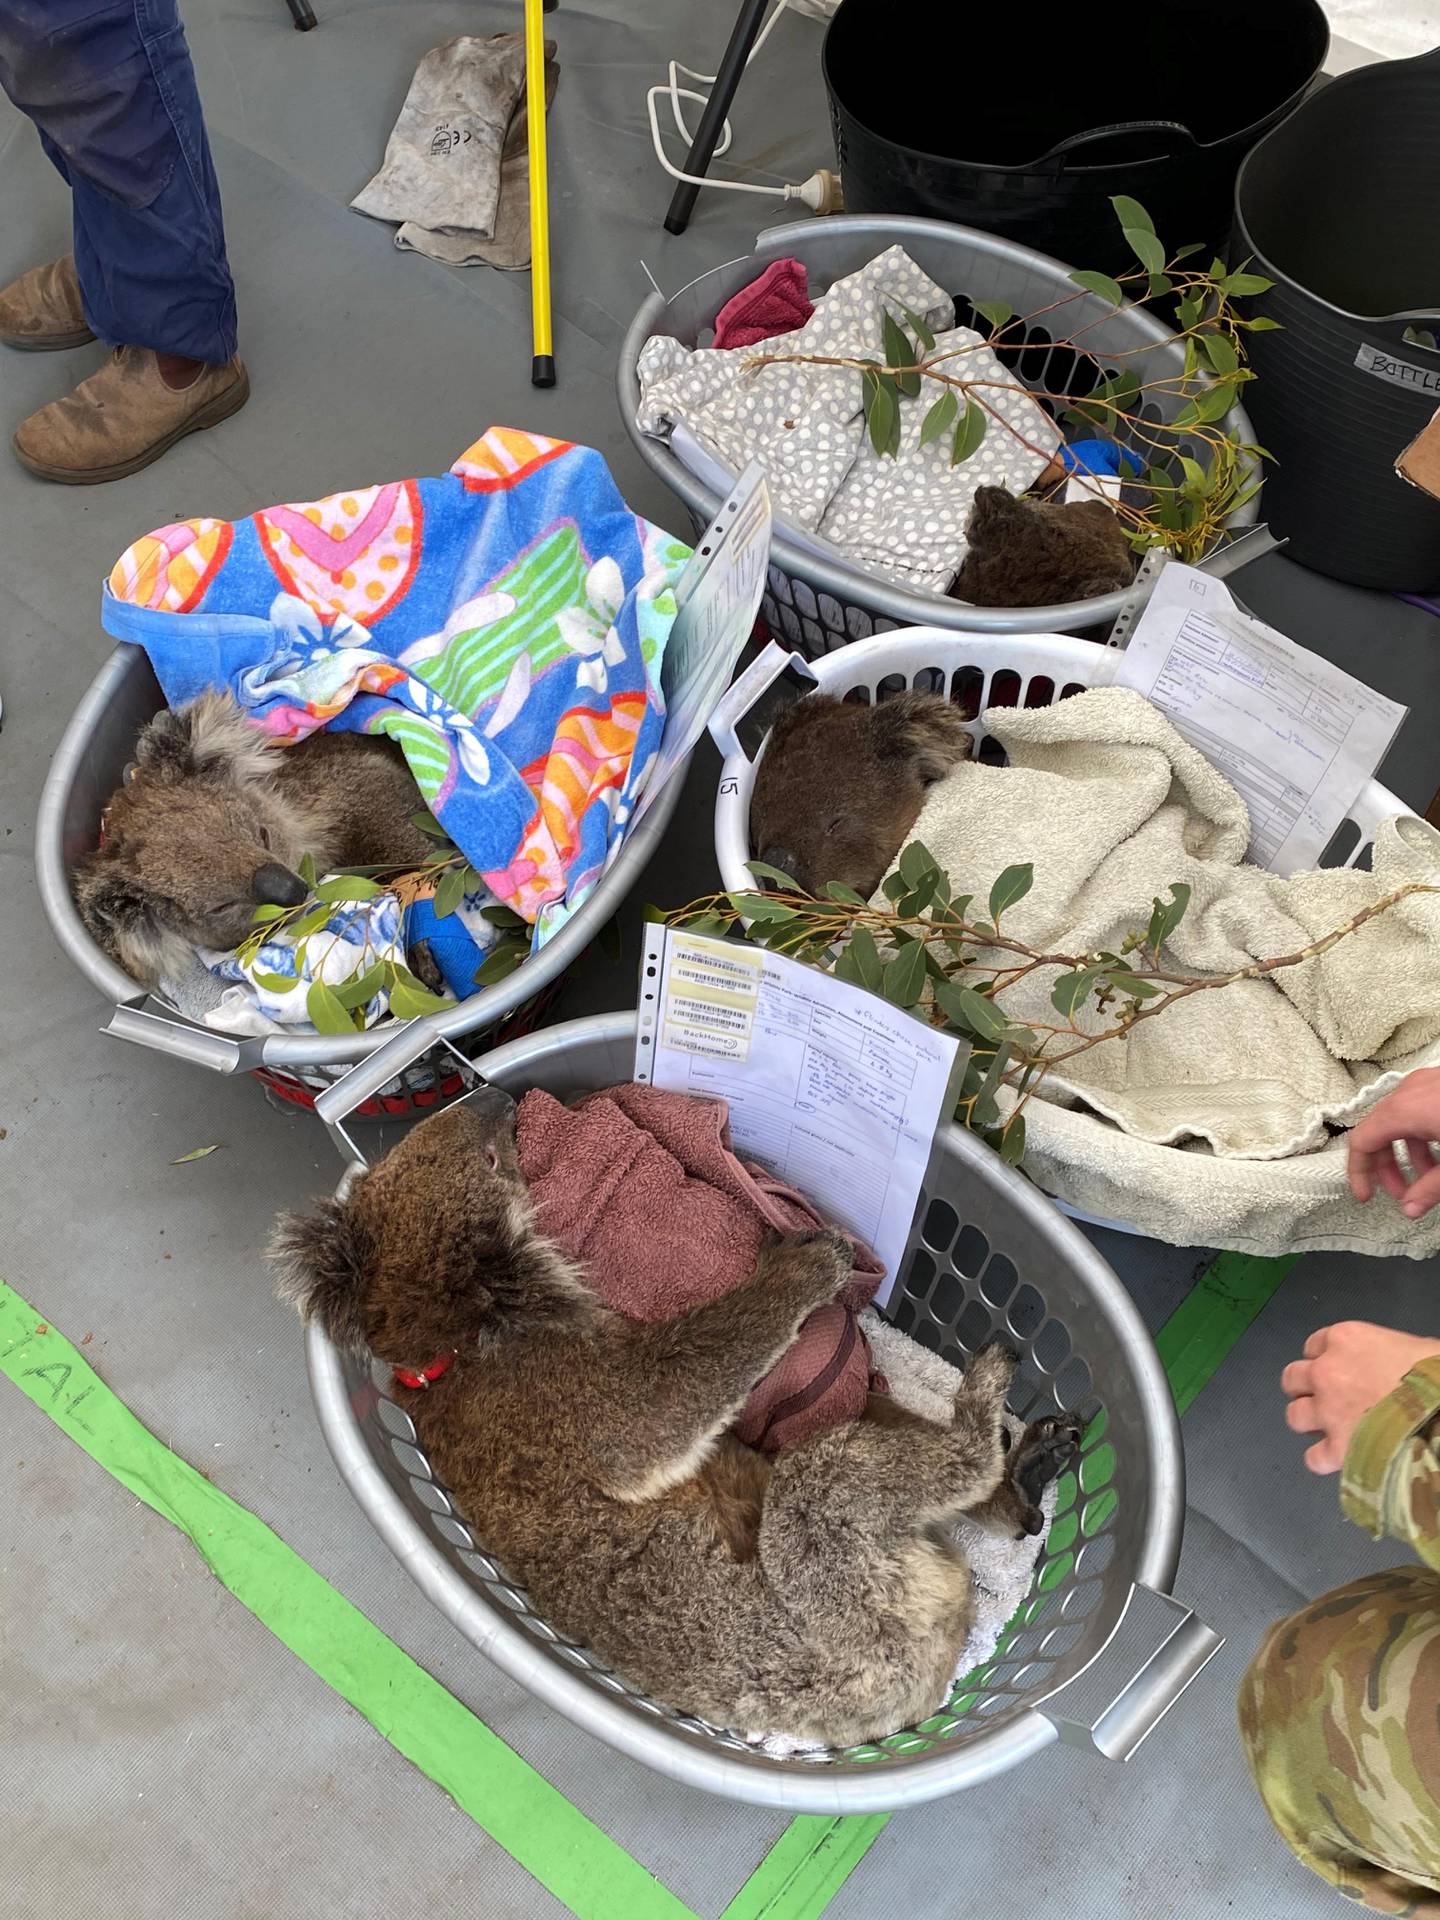 Injured koalas lay in baskets after being rescued from a bushfires on Kangaroo Island, Australia in this picture obtained by Reuters on January 17, 2020. RSPCA South Australia/via REUTERS THIS IMAGE HAS BEEN SUPPLIED BY A THIRD PARTY. MANDATORY CREDIT. NO RESALES. NO ARCHIVES.